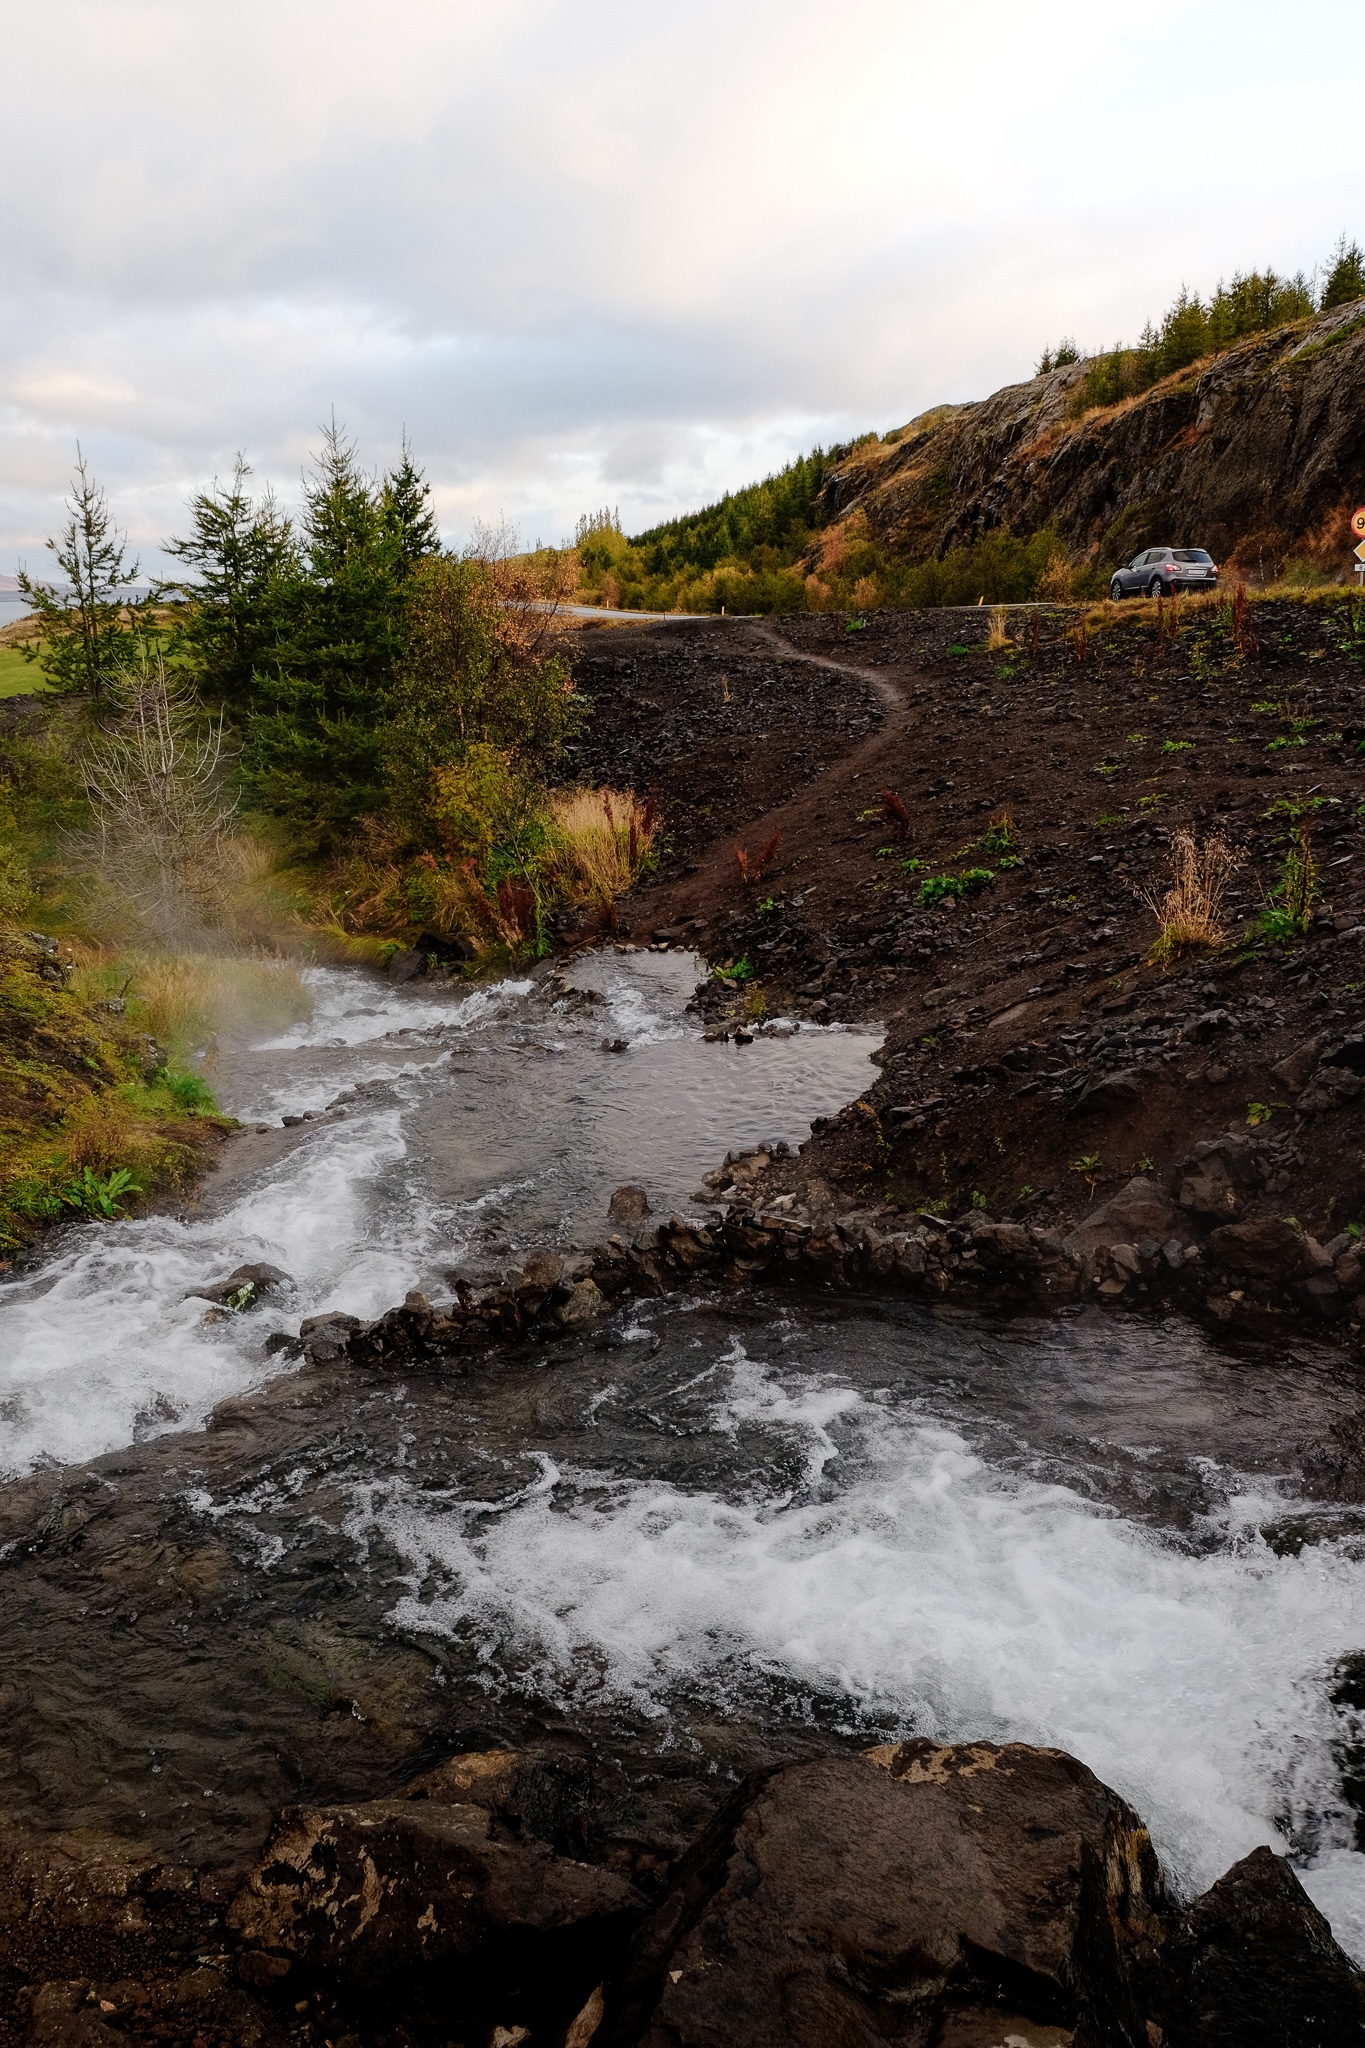 A naturally occuring geothermal stream flows where man made bath areas have been formed by creating small damns for anyone to bath in